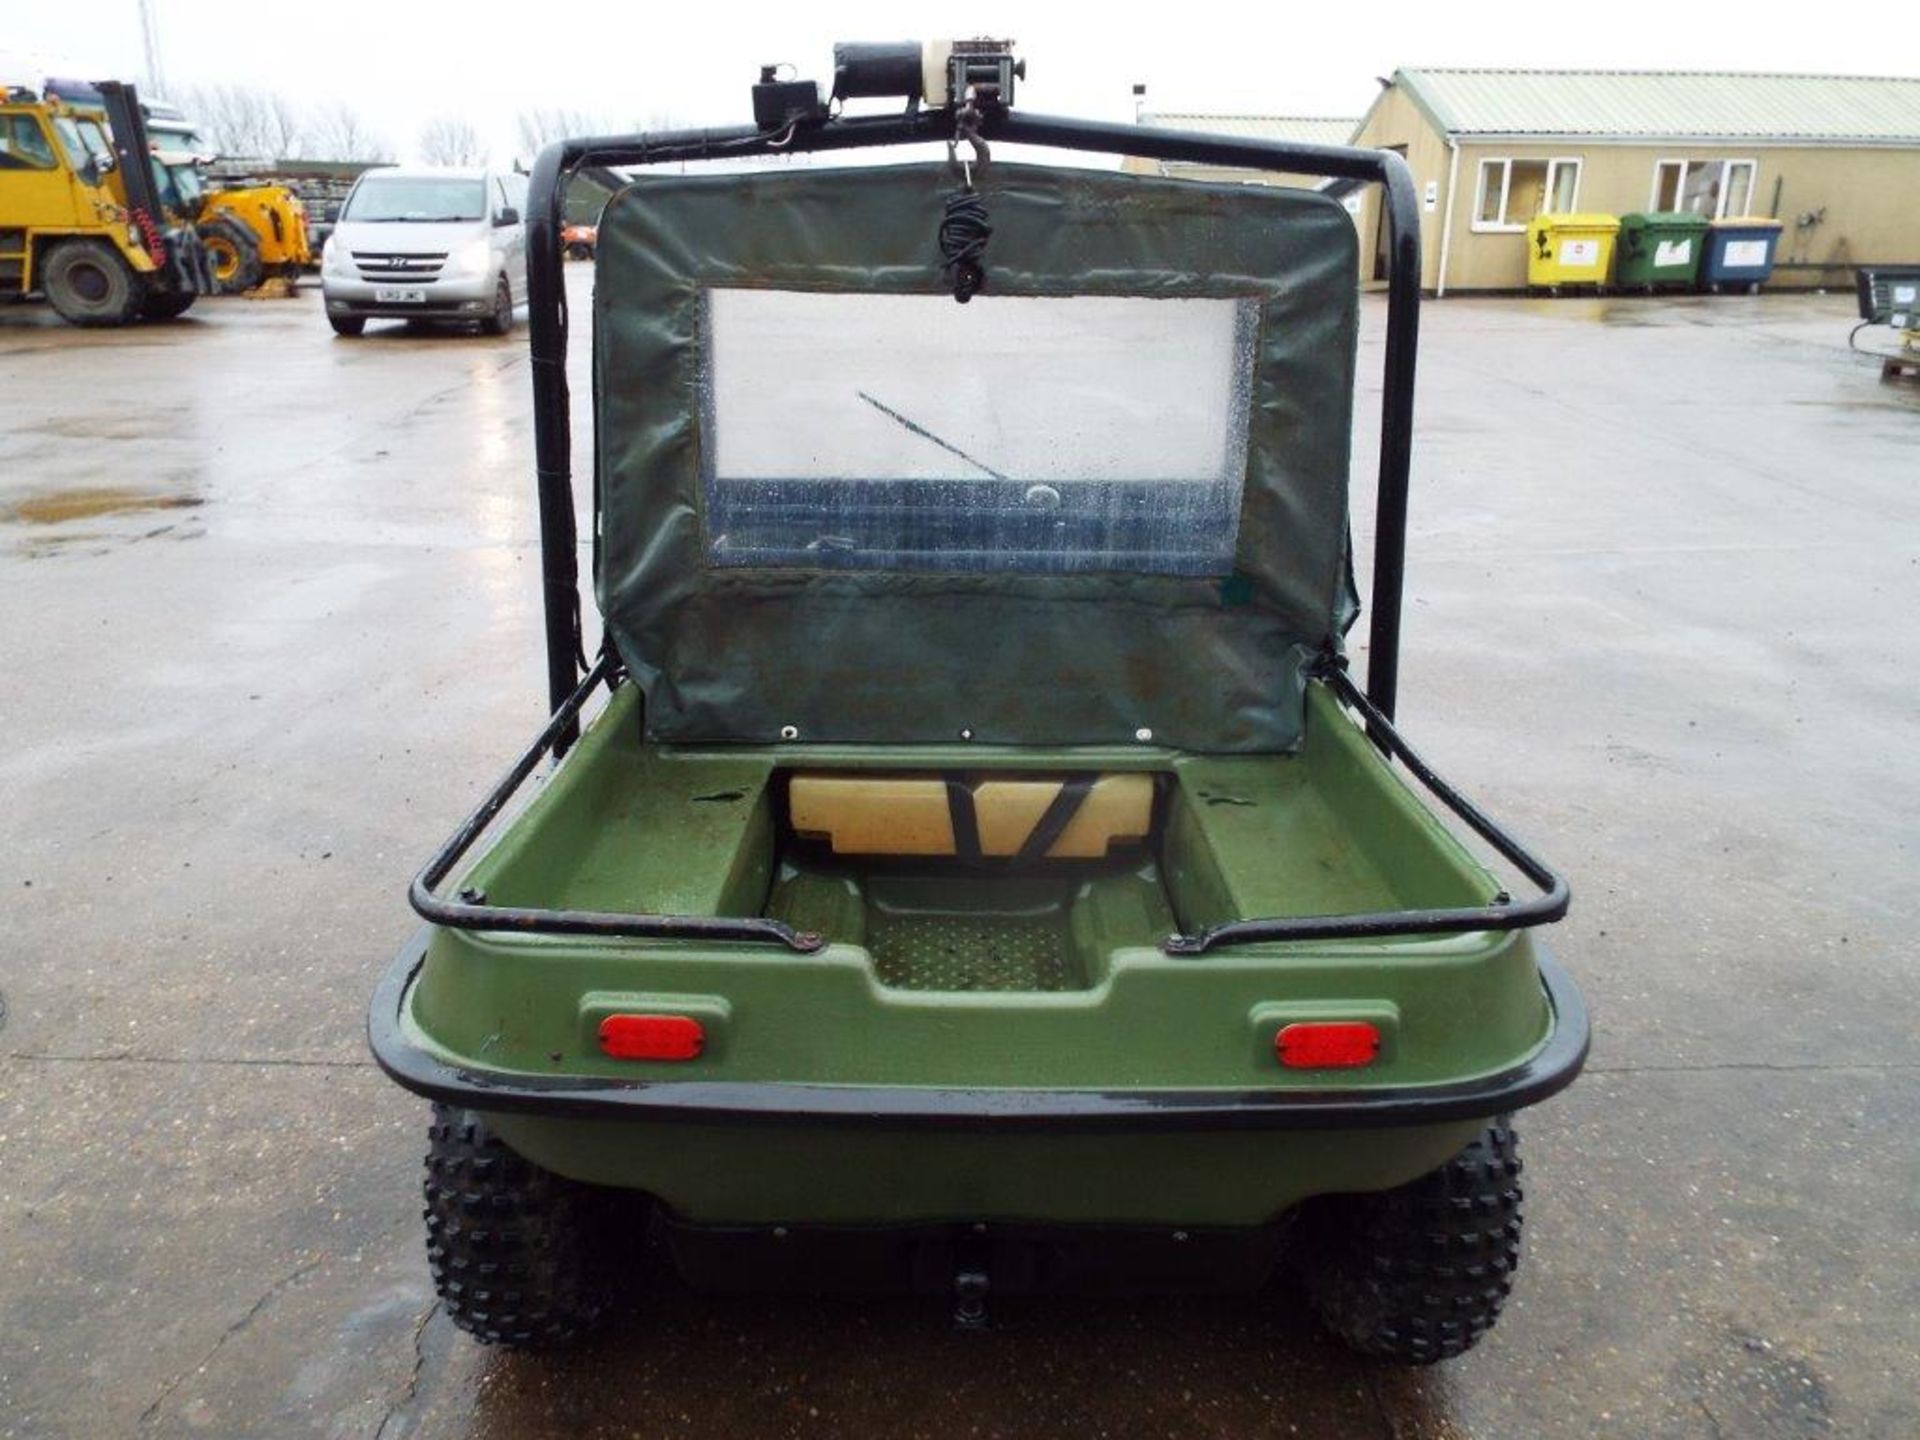 Argocat 8x8 V890-23 Amphibious ATV with Canopy and Front + Rear Winches - Image 6 of 25